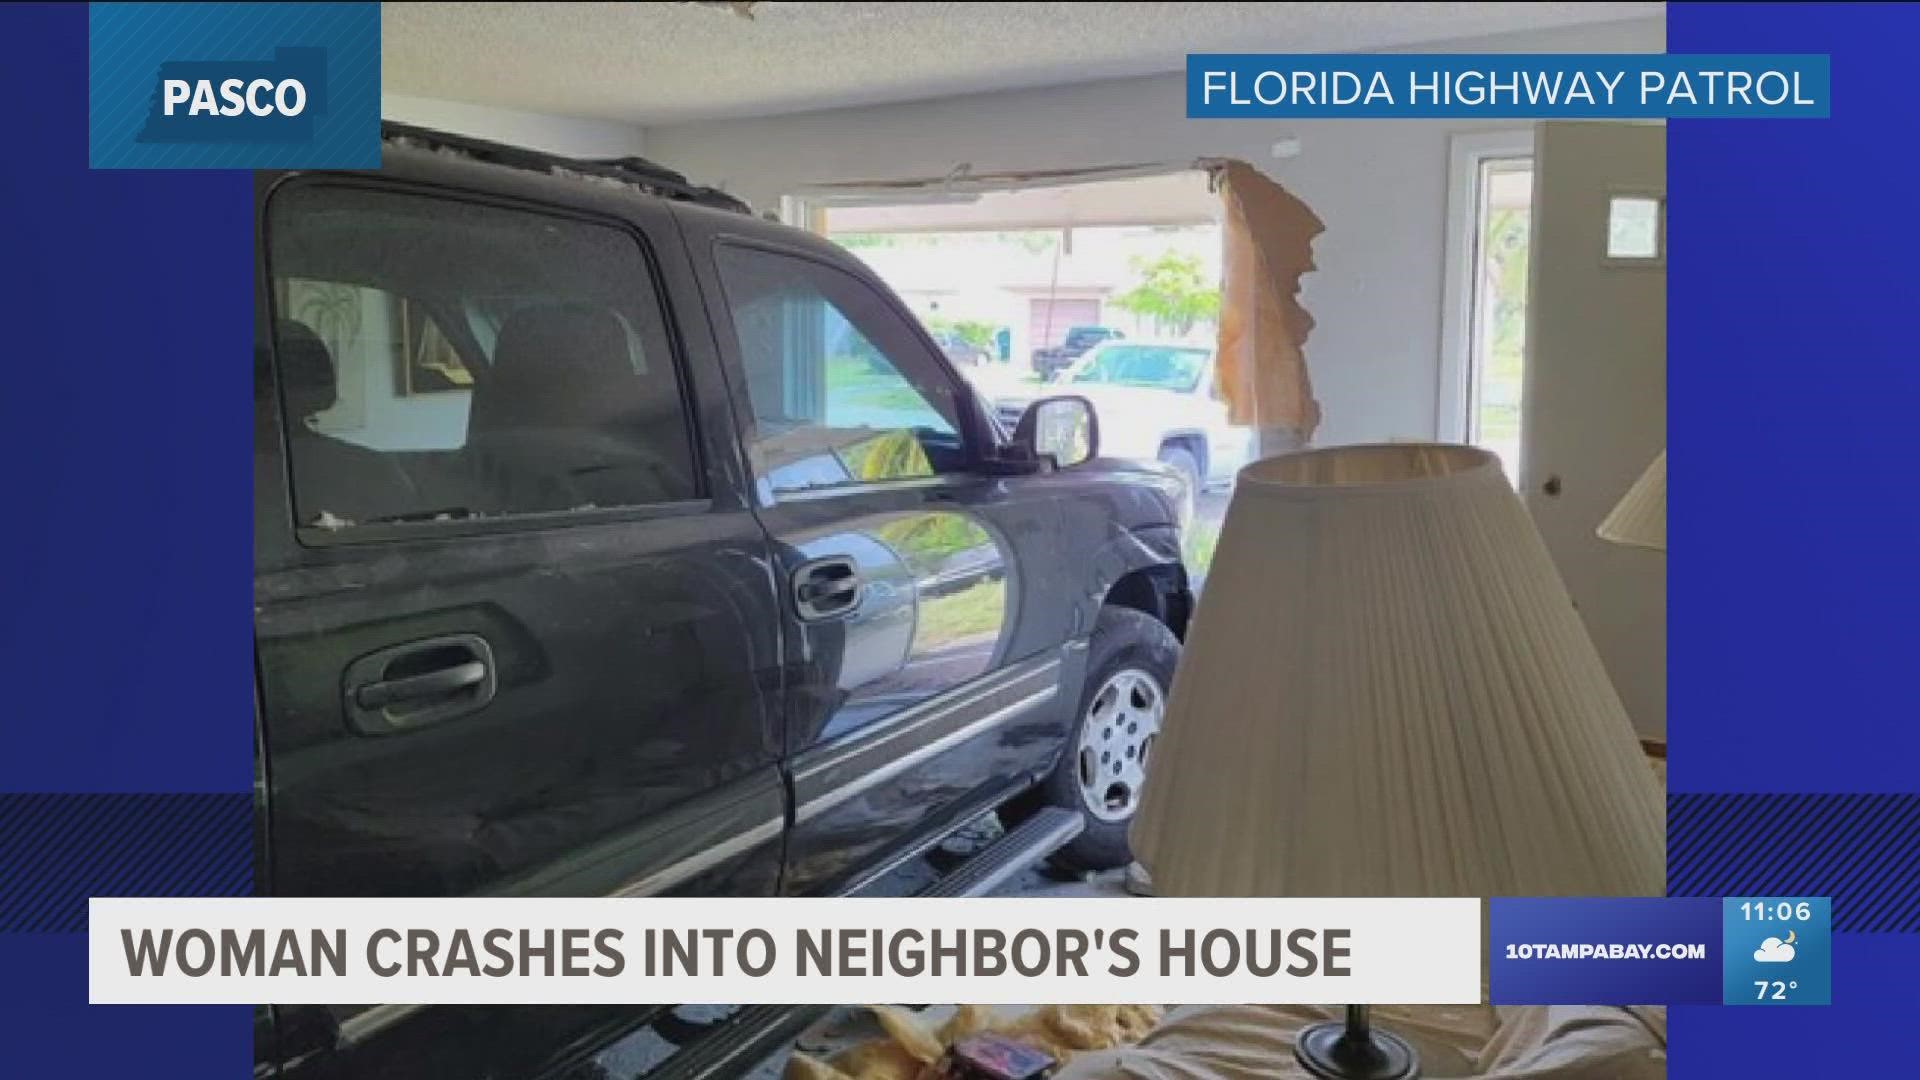 Luckily, no one was inside the house during the crash, according to FHP.